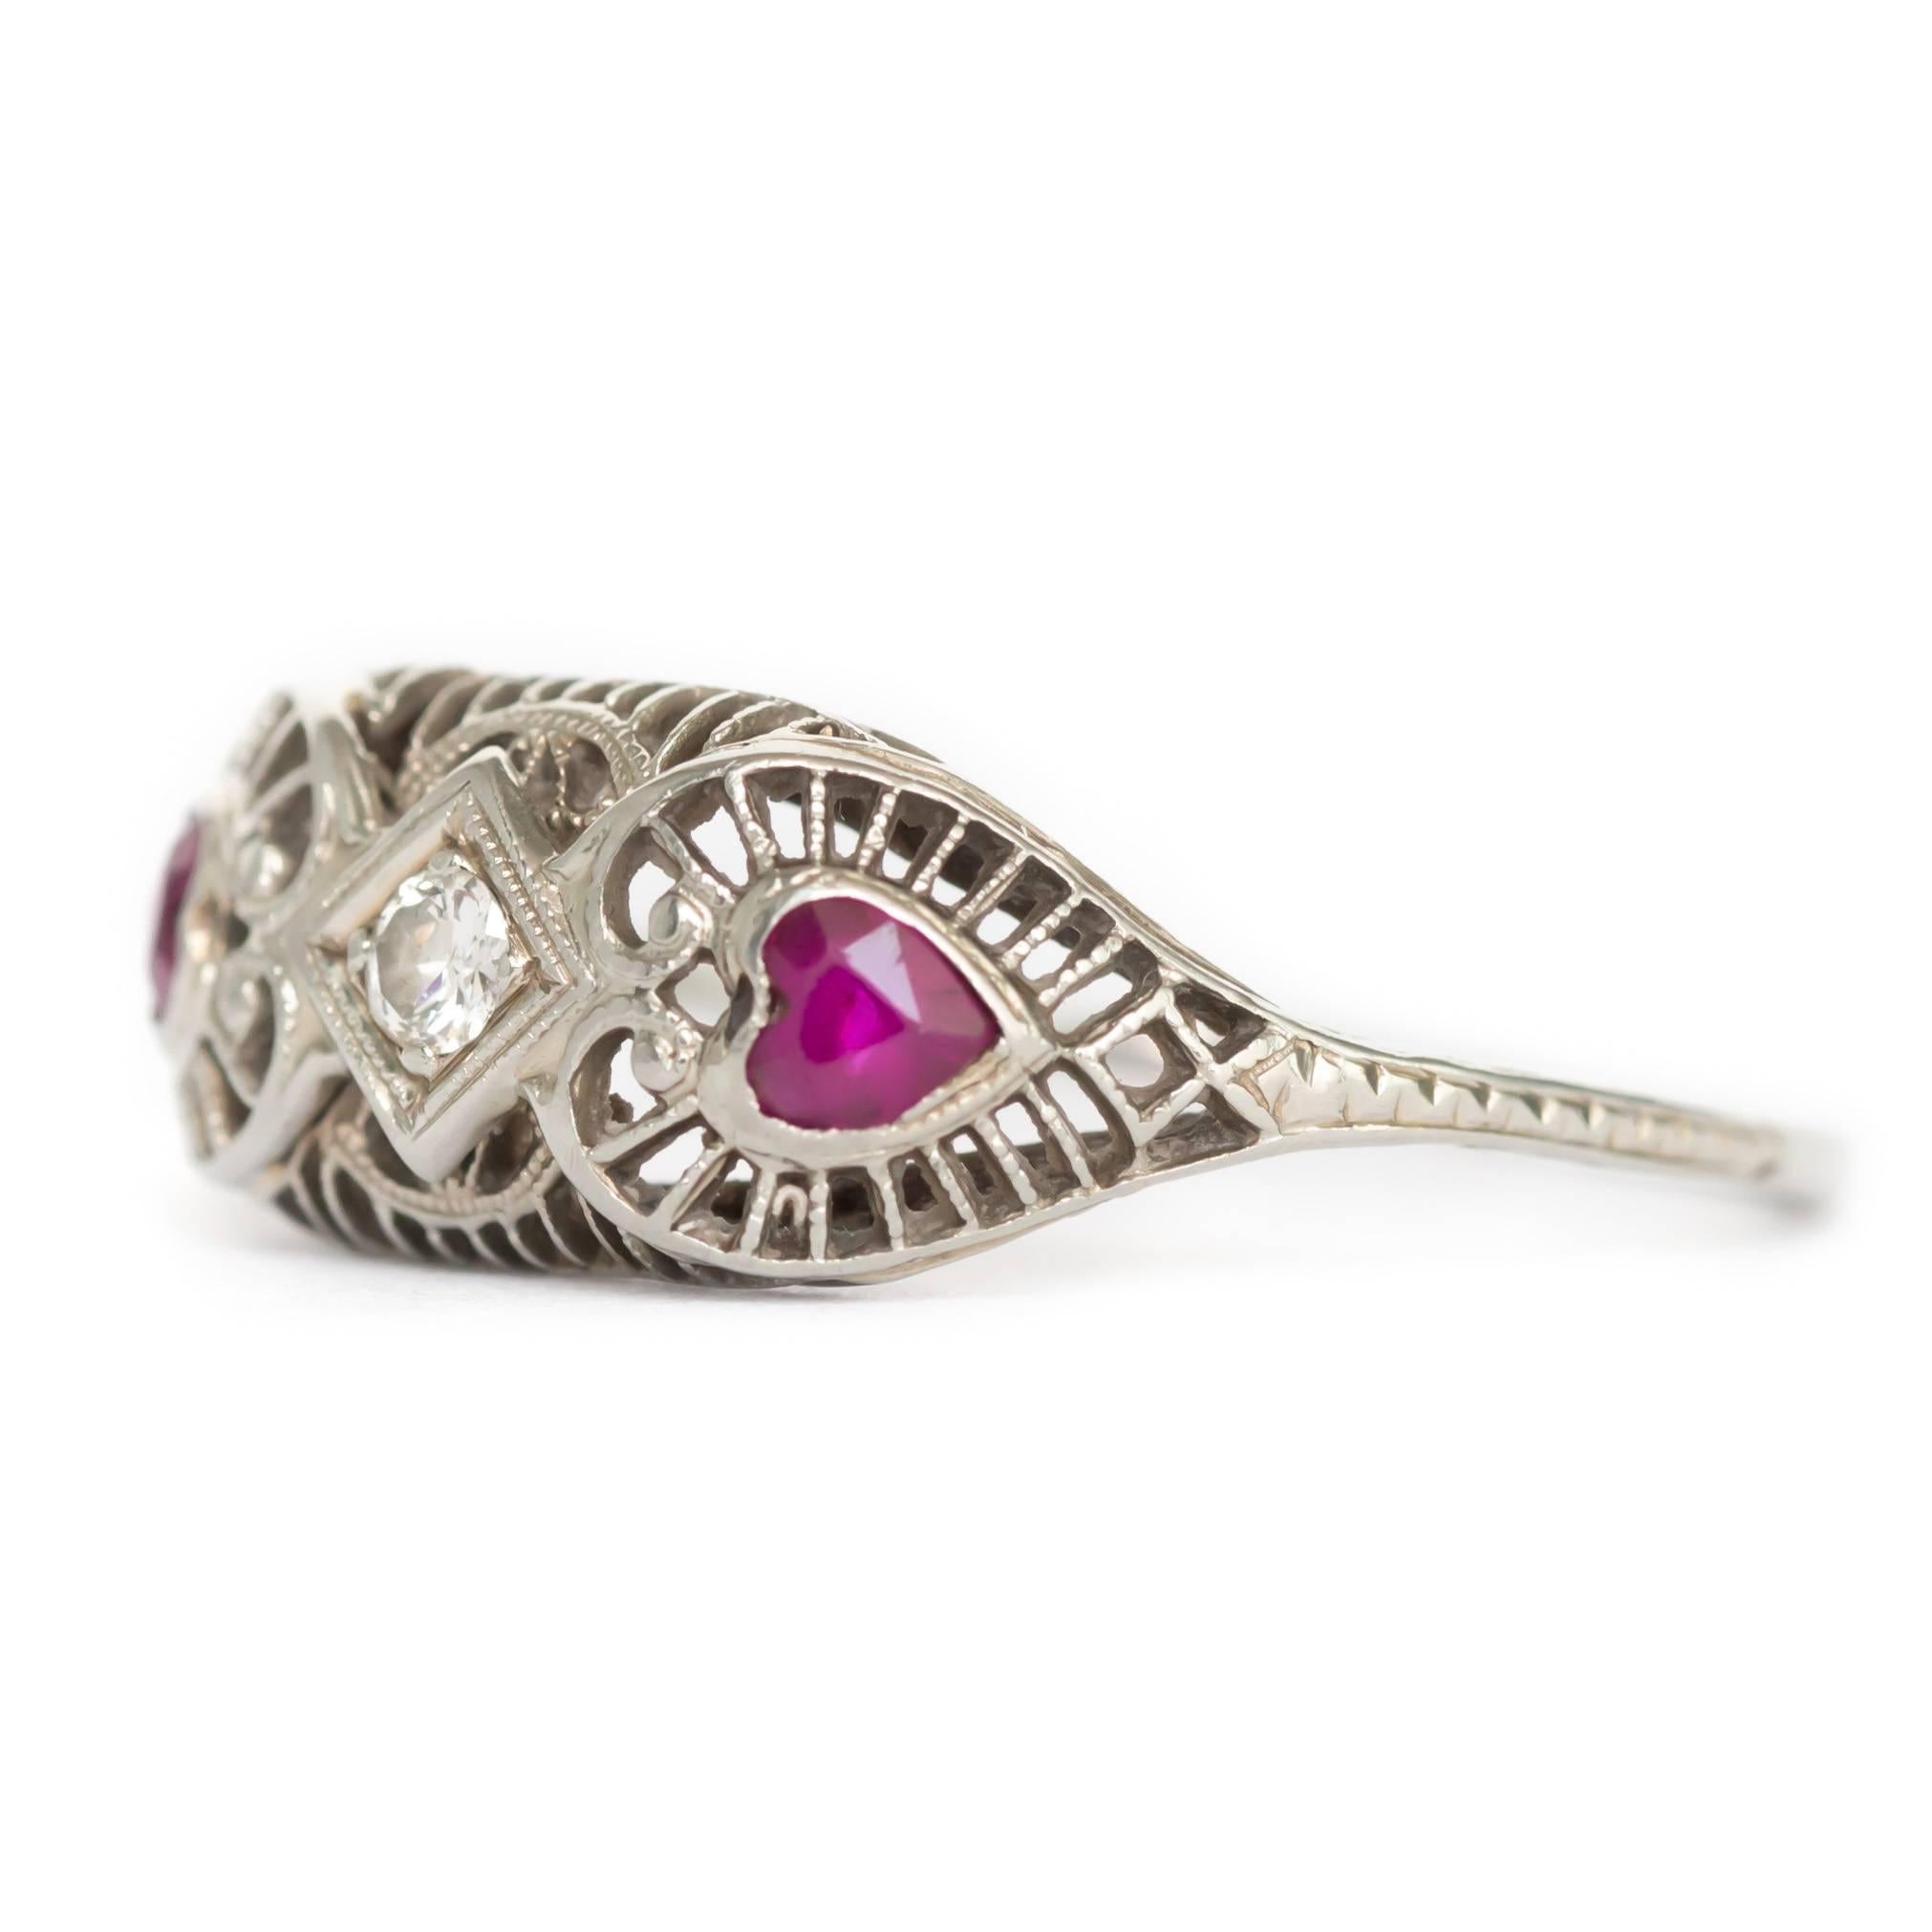 Item Details: 
Ring Size: Approx. 8.15
Metal Type: 18K White Gold
Weight: 2.0 grams

Center Diamond Details:
Shape: Old European
Carat Weight: .04ct
Color: G
Clarity: SI1

Color Stone Details: 
Type: Ruby
Shape: Heart
Carat Weight: .30ct, total